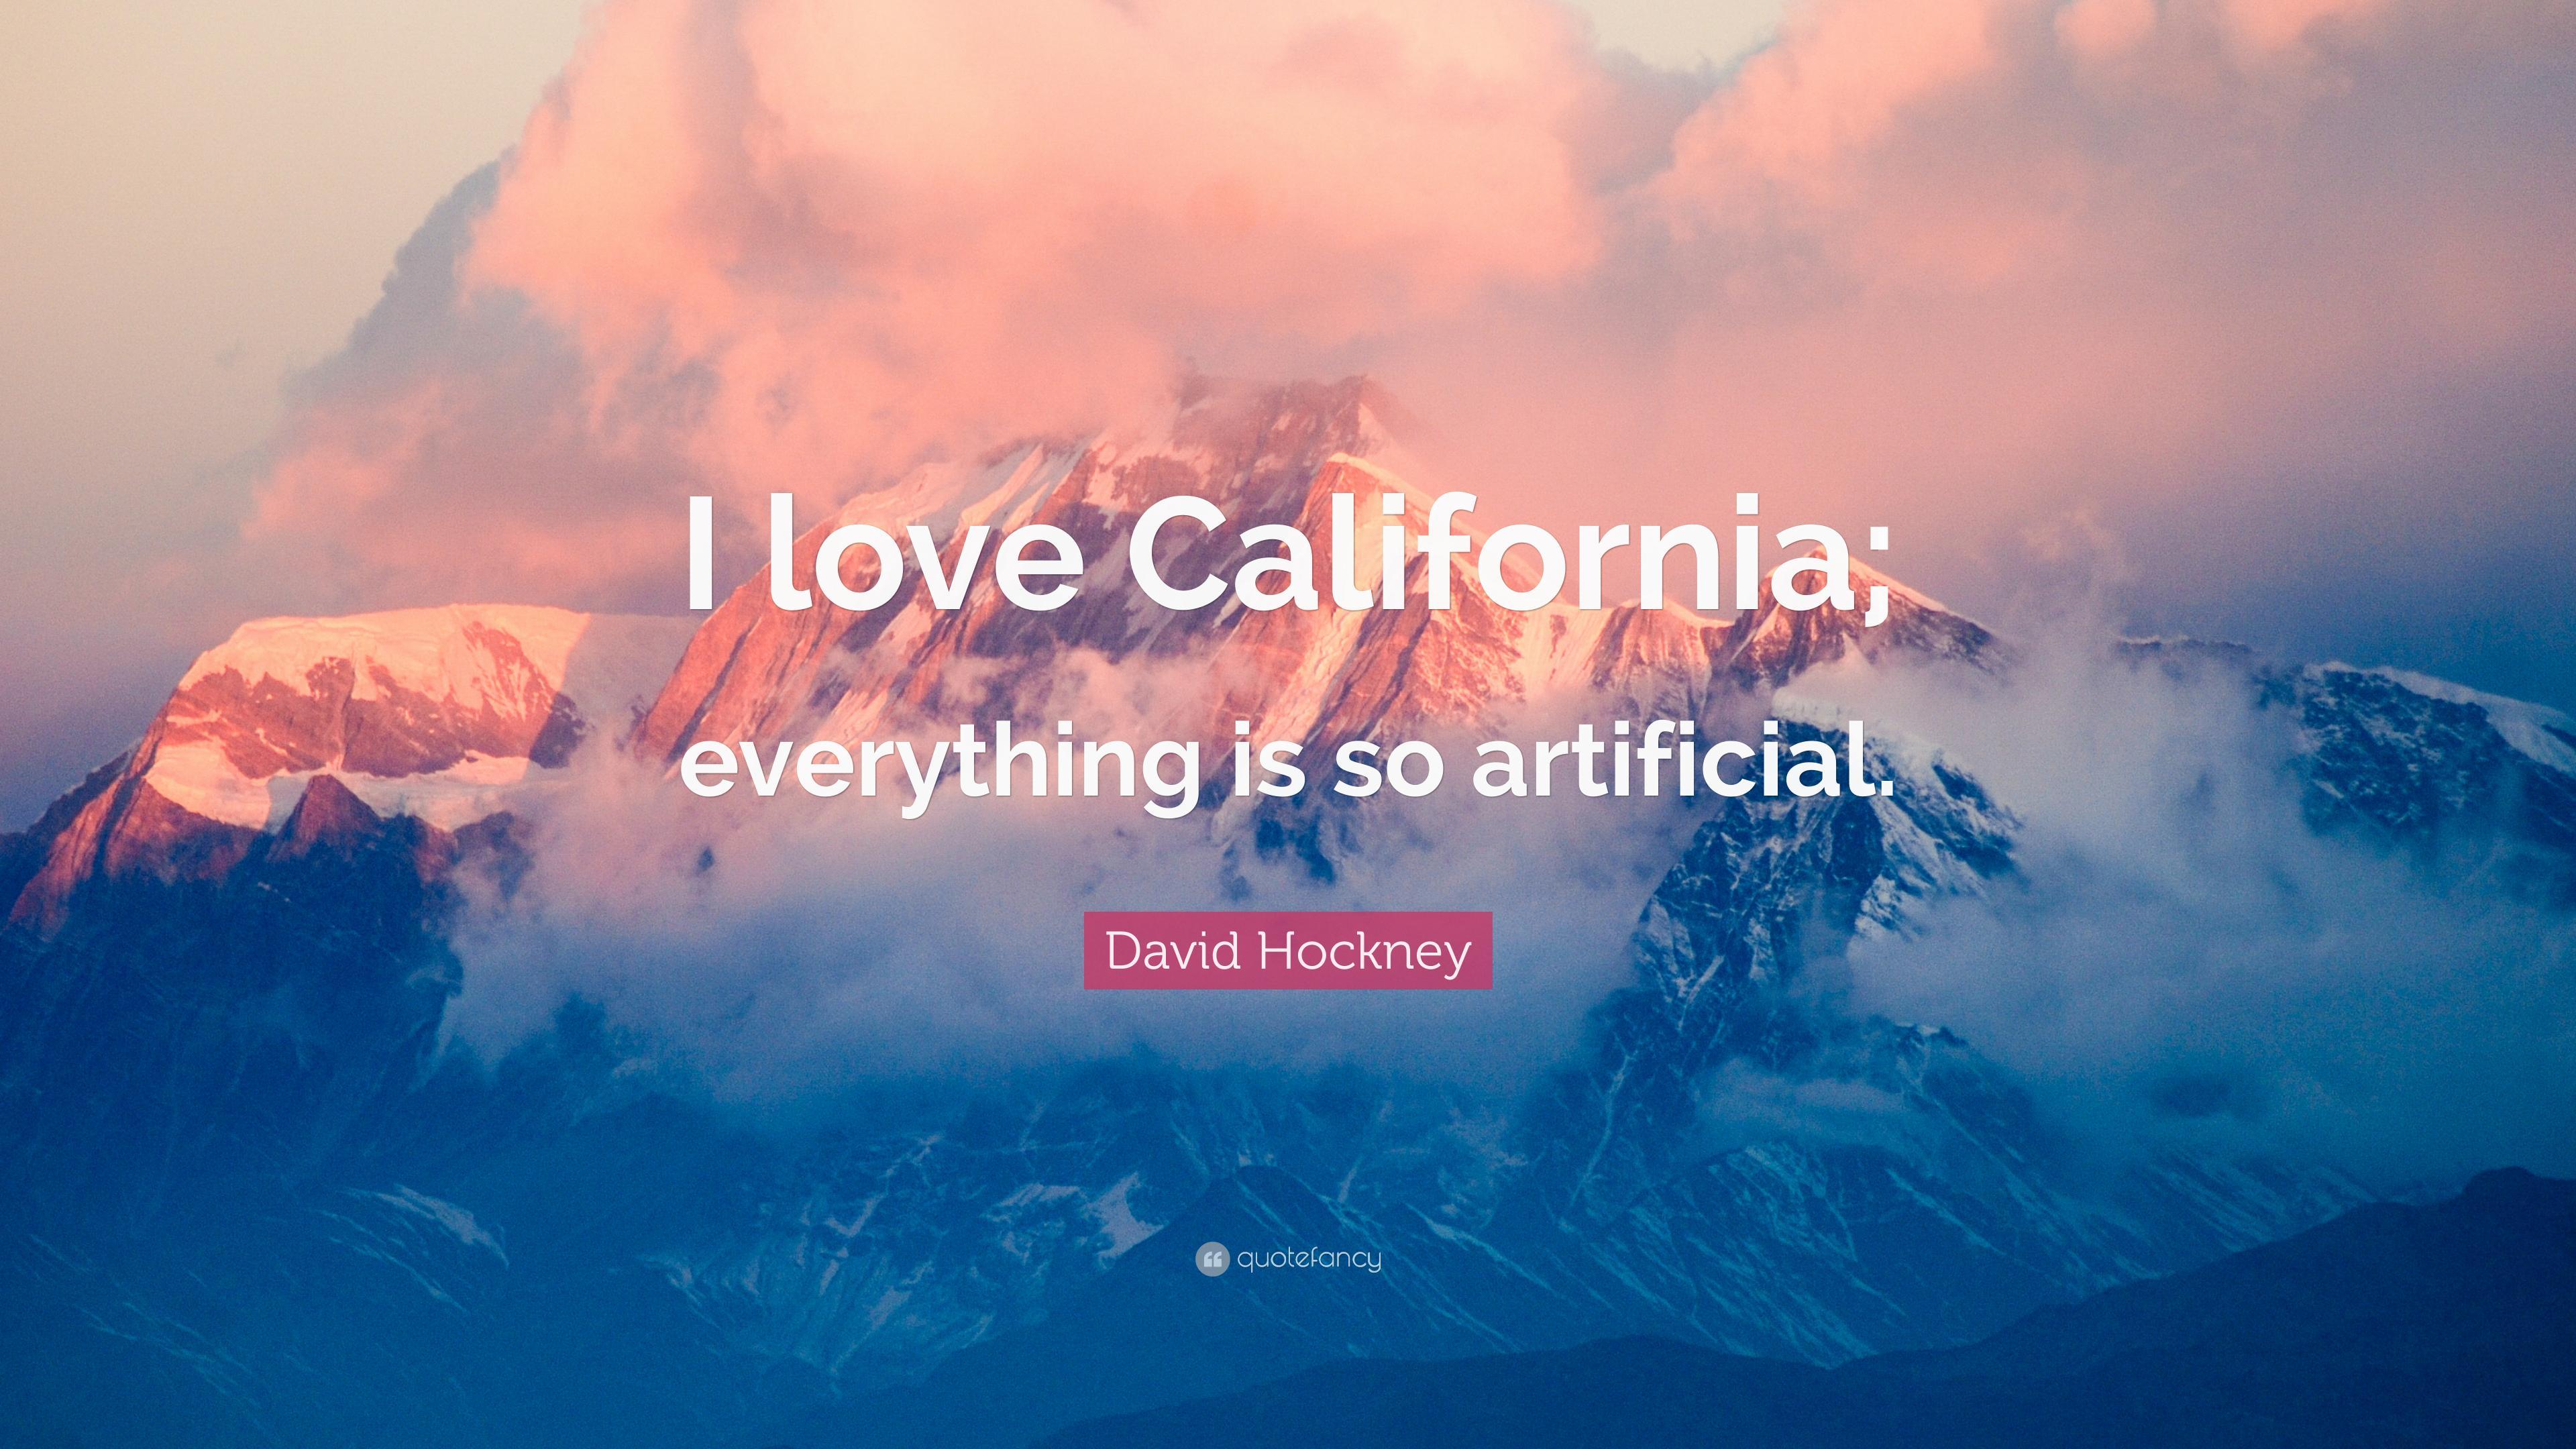 David Hockney Quote: “I love California; everything is so artificial